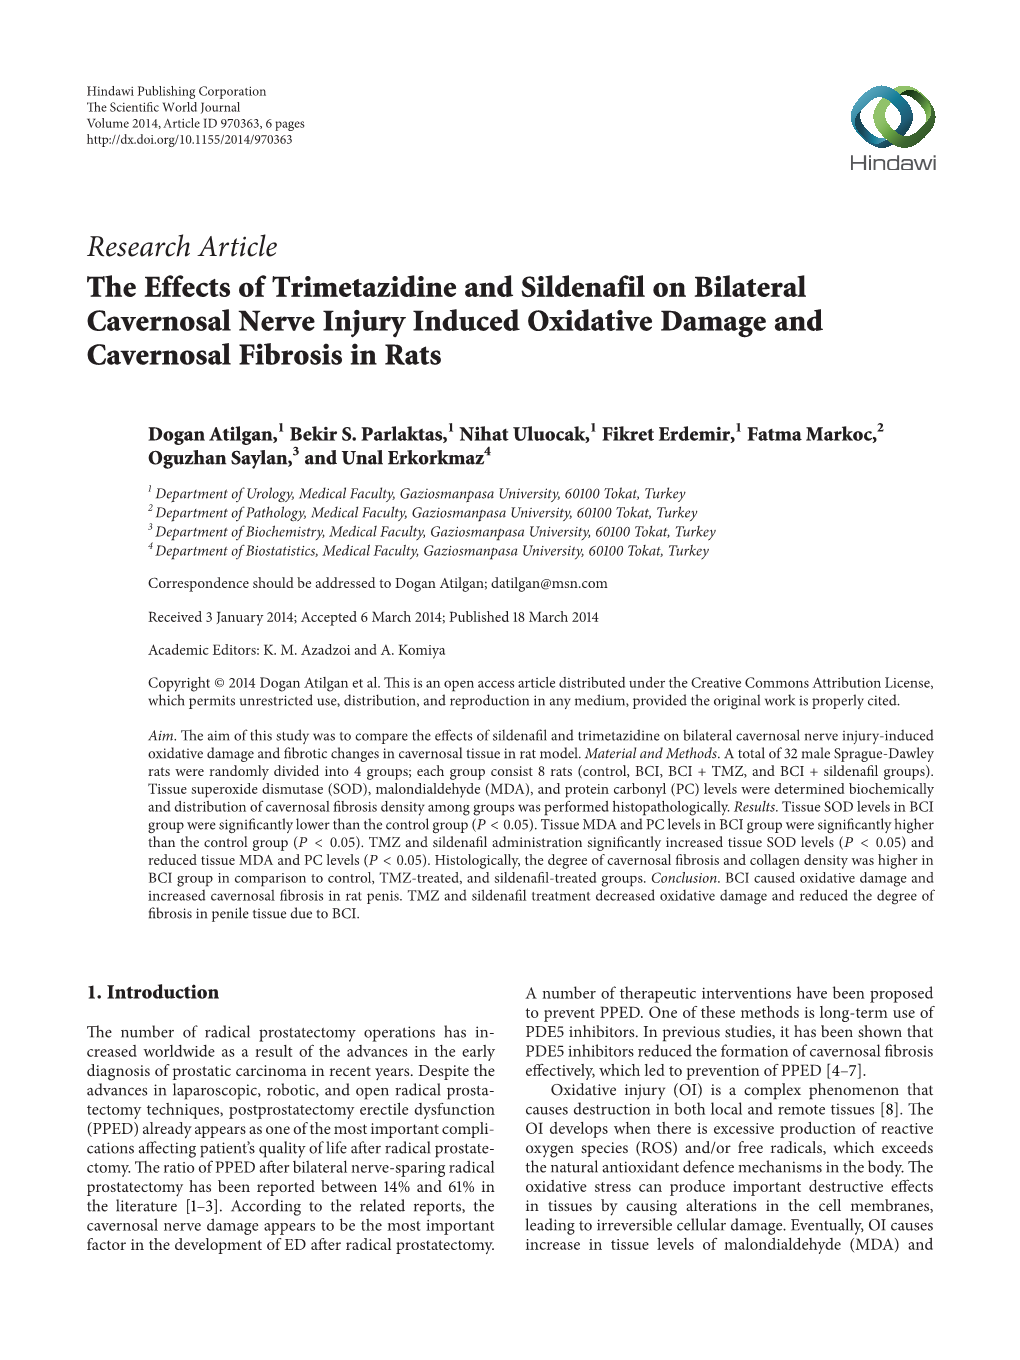 The Effects of Trimetazidine and Sildenafil on Bilateral Cavernosal Nerve Injury Induced Oxidative Damage and Cavernosal Fibrosis in Rats